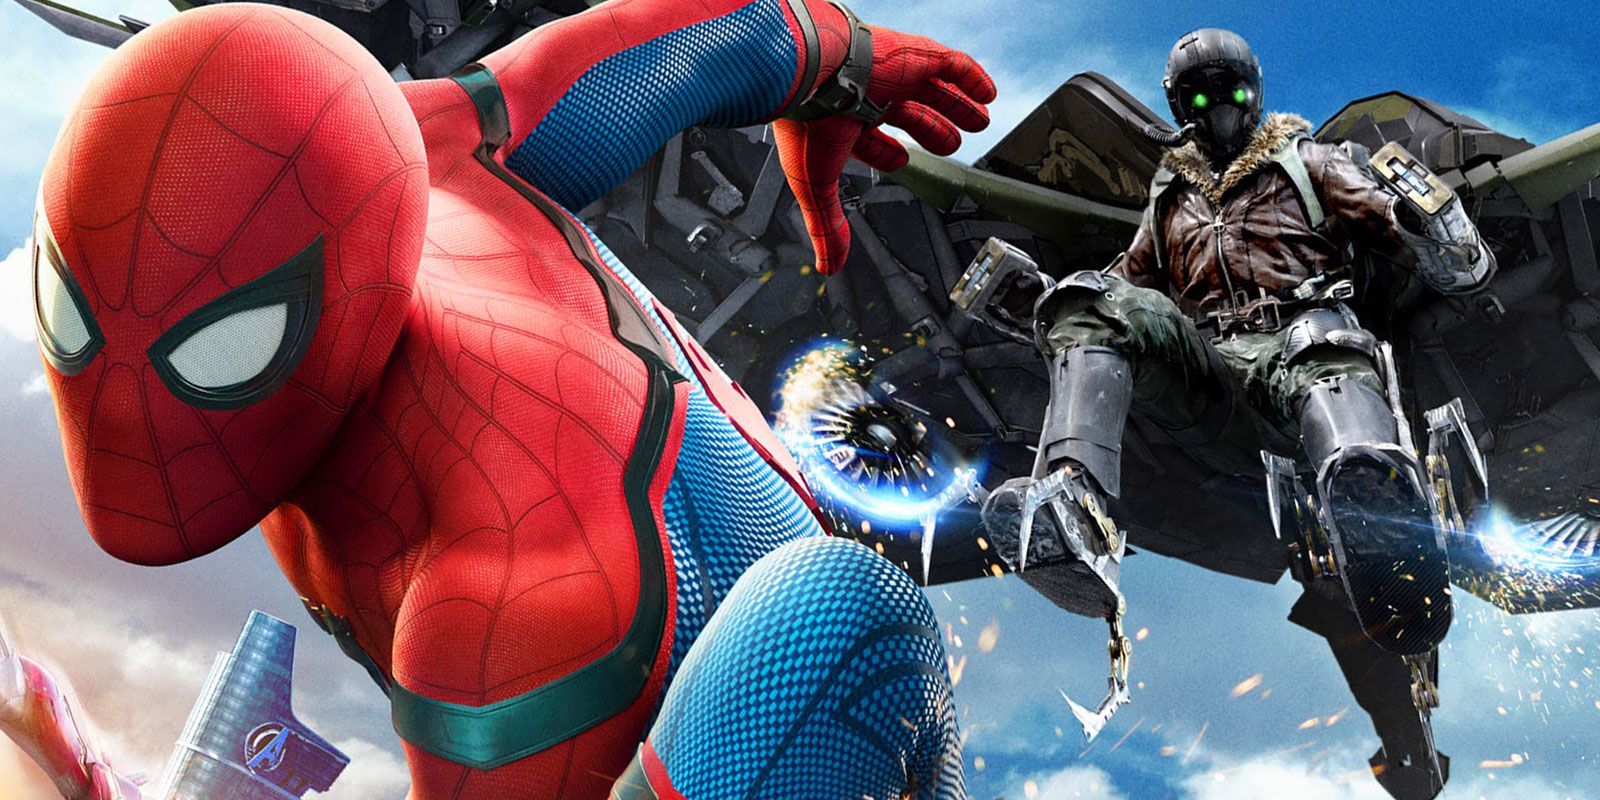 15 Reasons The Vulture Is The Hero Spider-Man: Homecoming Deserves!